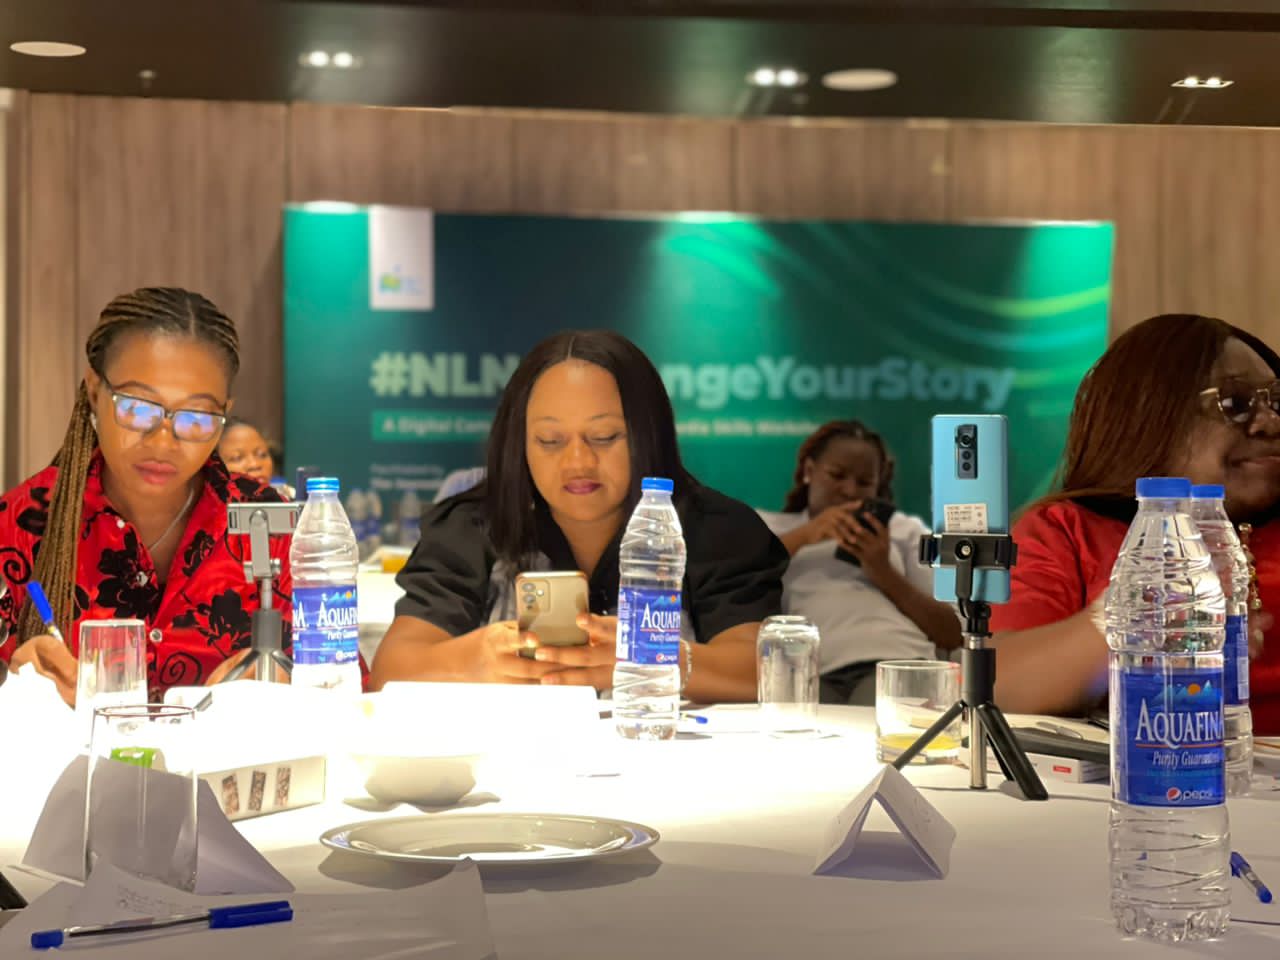 How NLNG activated journalists to dismantle gender divide (in photos)